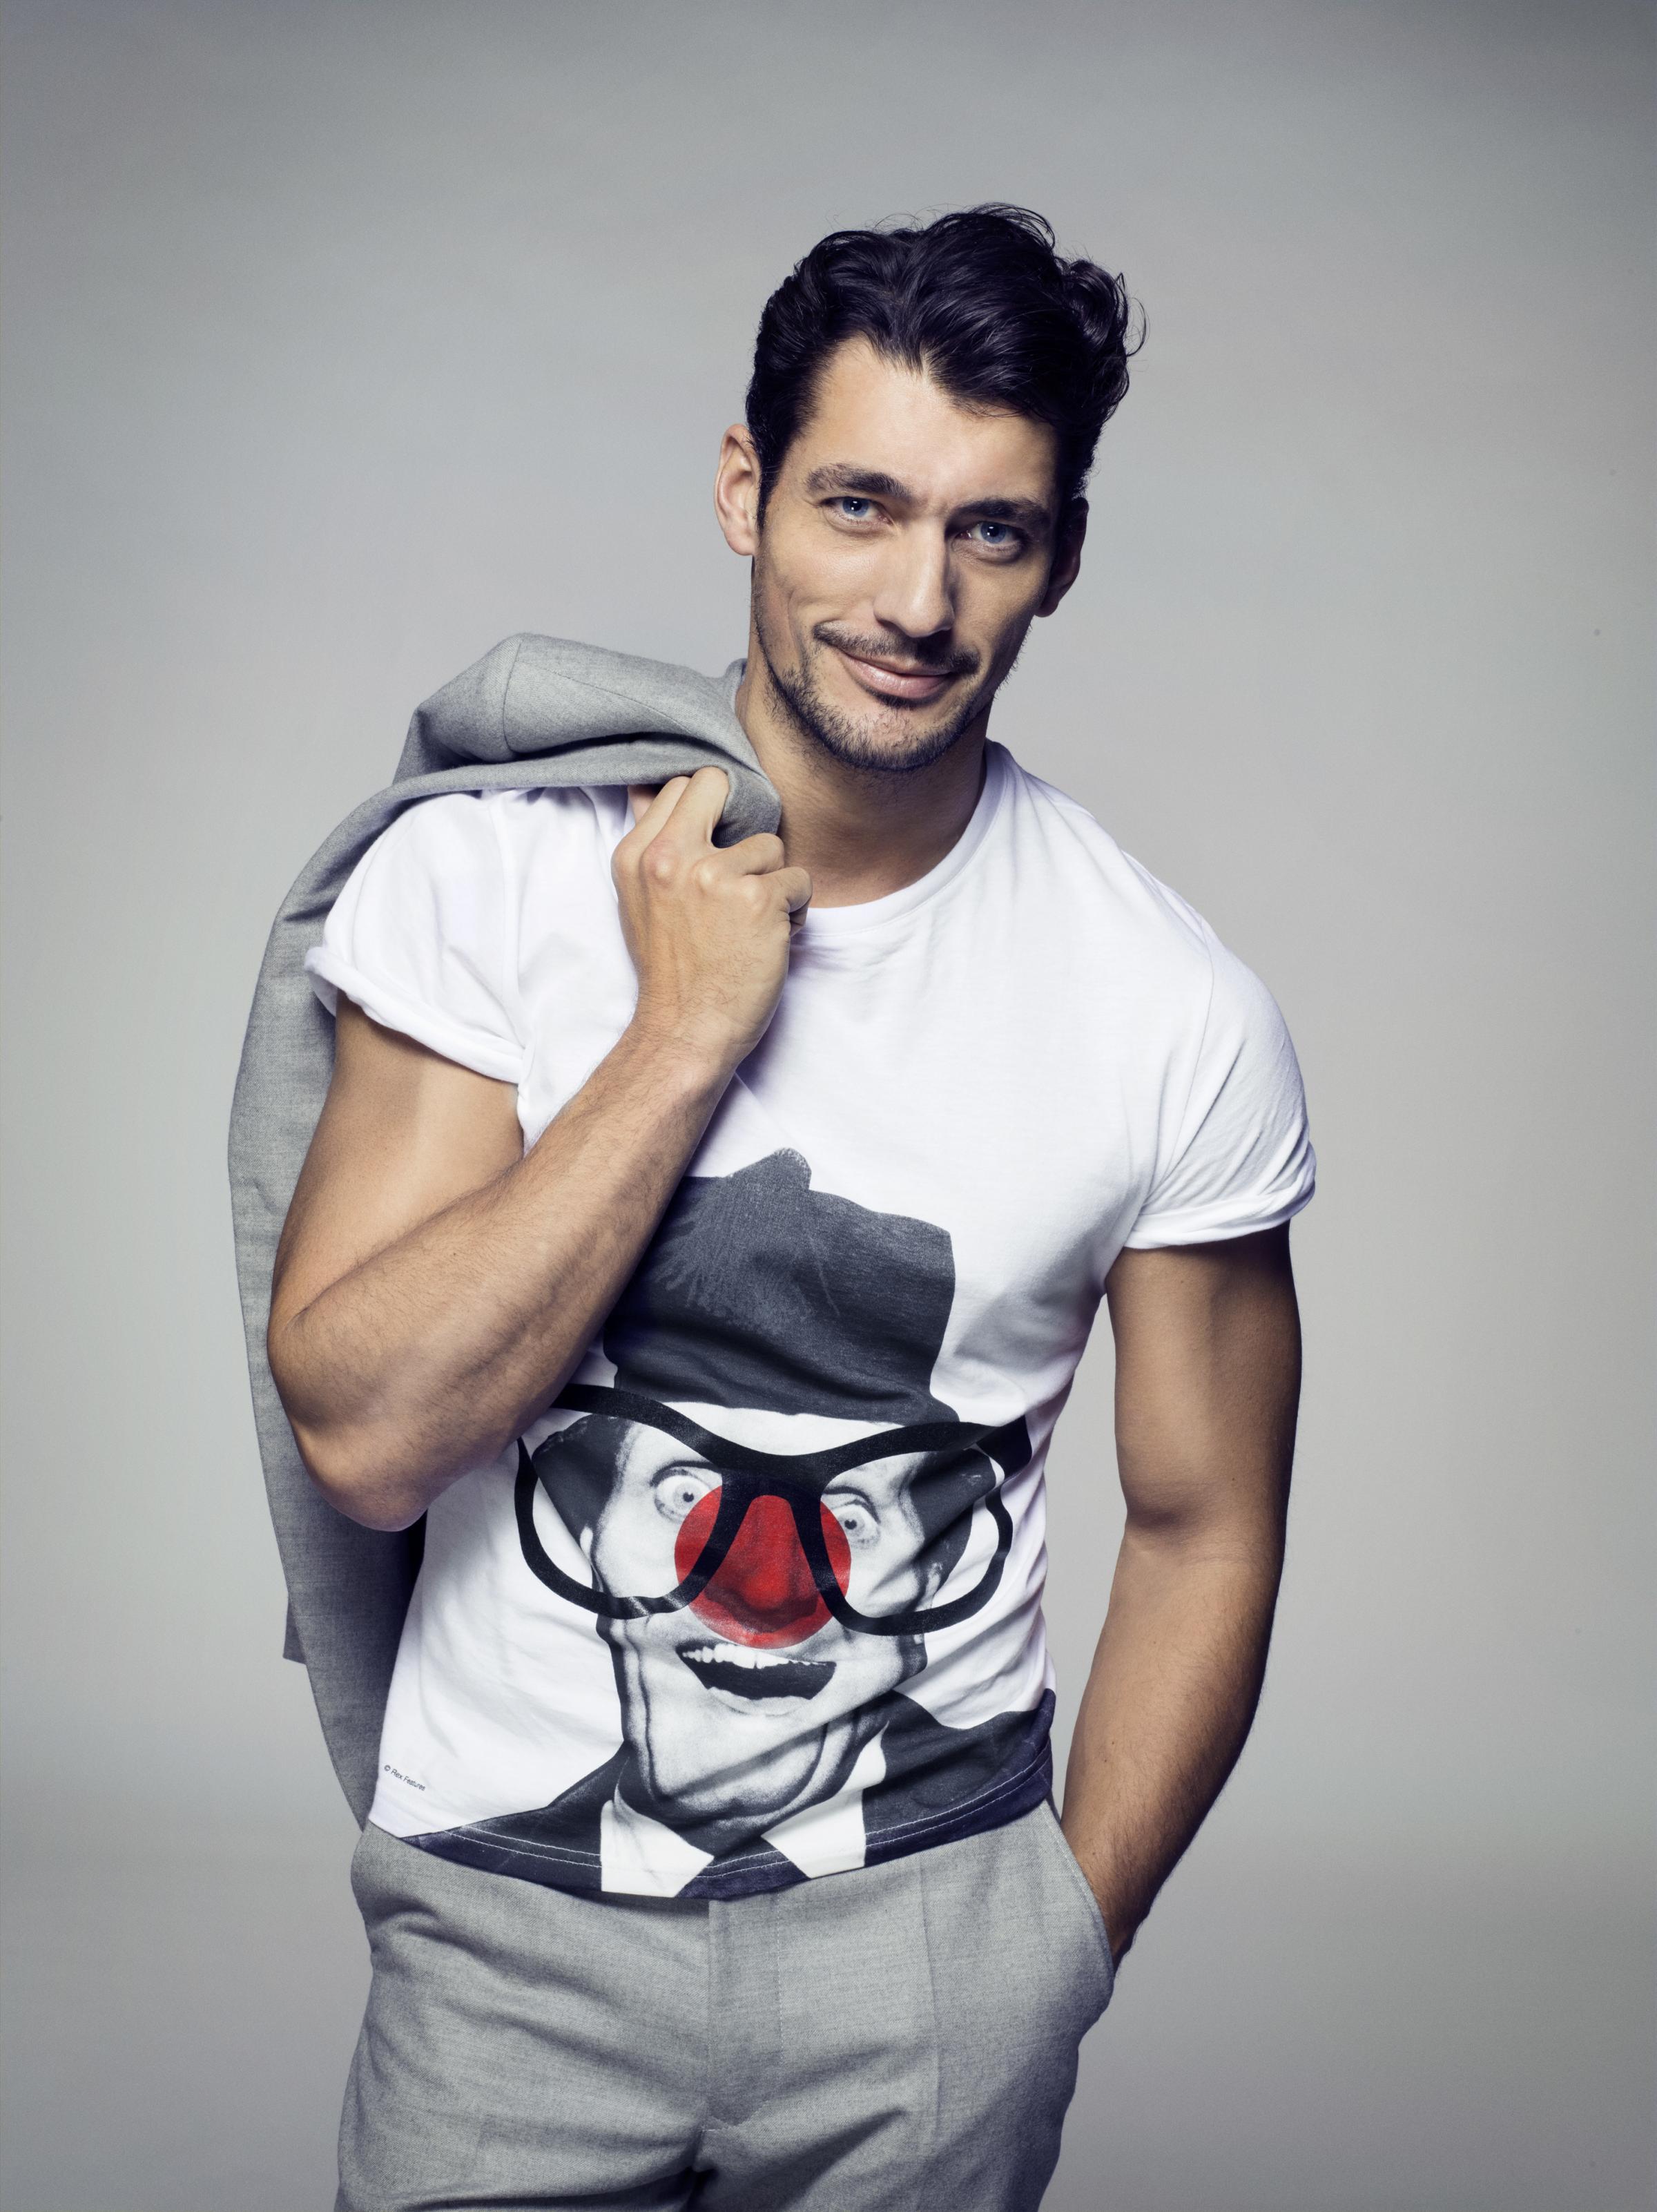 Striking a pose - Billericay-born model David Gandy showing his support for Comic Relief